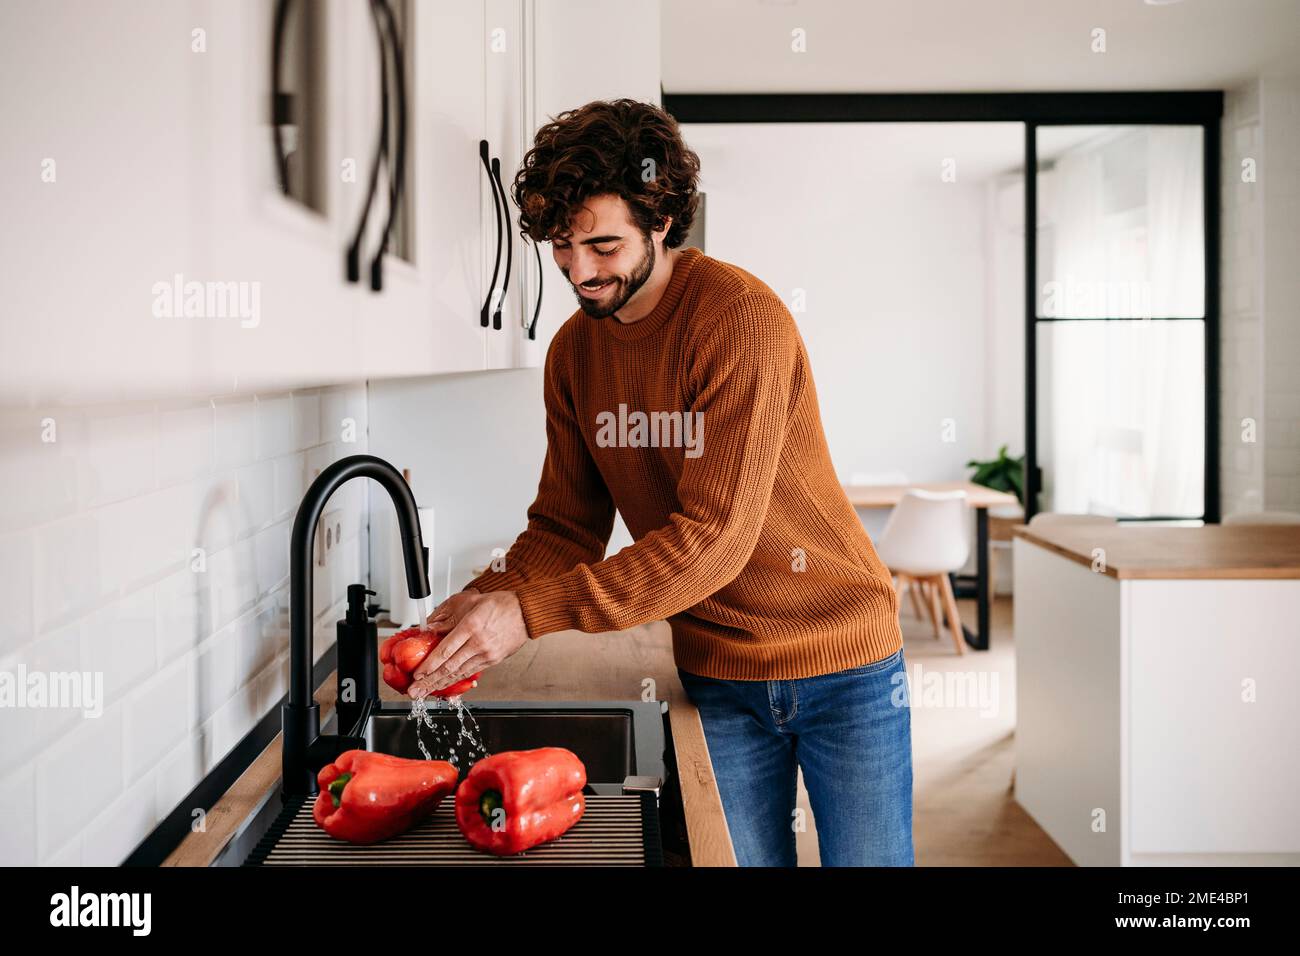 Happy man washing red bell peppers in sink at home Stock Photo